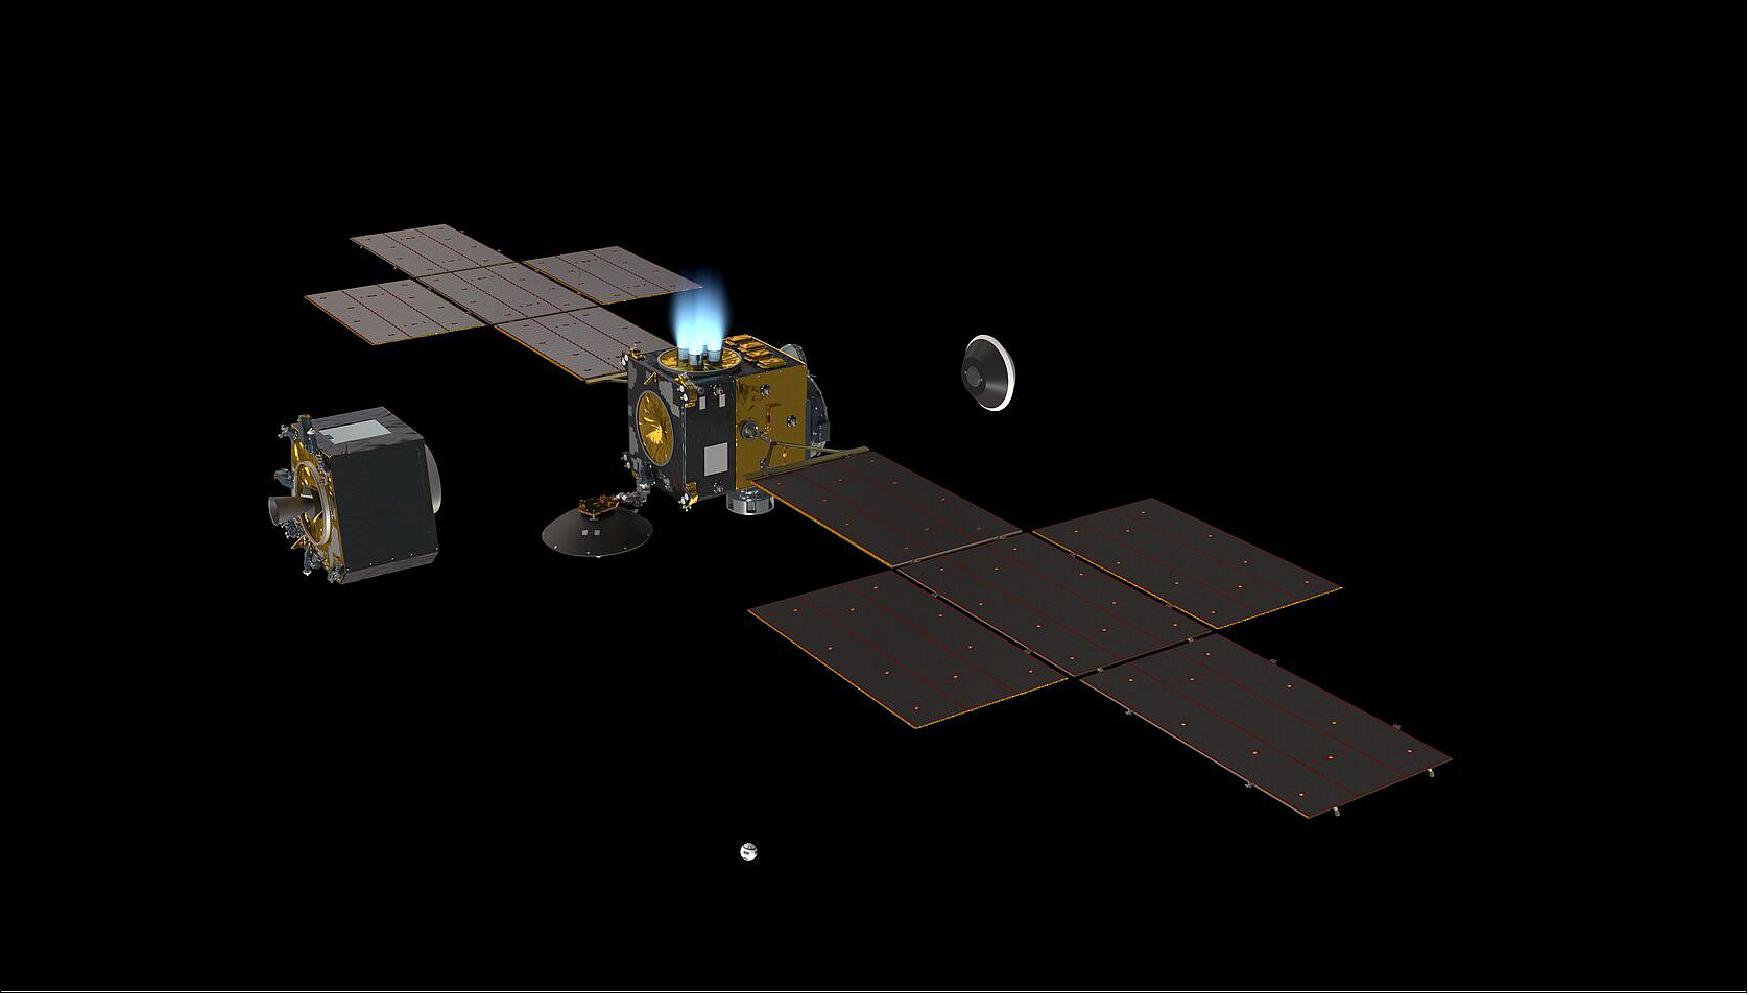 Figure 5: An artist's impression of ESA’s Earth Return Orbiter spacecraft that is part of the Mars Sample Return series of missions to bring back samples from Mars. The image shows the elements of Earth Return Orbiter. Including the basketball-sized container with samples from Mars, the Orbit Insertion Module – a chemical propulsive stage for inserting the spacecraft into Mars orbit that is ejected to save mass on the return to Earth – and the Earth entry capsule that will splash down on Earth. - The Mars Sample Return campaign will need three launches from Earth to accomplish landing, collecting, storing and finding samples and delivering them to Earth. A NASA launch will send the Sample Return Lander mission to land a platform near the Mars 2020 site. From here, a small ESA rover – the Sample Fetch Rover – will head out to retrieve the cached samples. - Once it has collected them in what can be likened to an interplanetary treasure hunt, it will return to the lander platform and load them into a single large canister on the Mars Ascent Vehicle (MAV). This vehicle will perform the first liftoff from Mars and carry the container into Mars orbit. - ESA’s Earth Return Orbiter is the last mission of the Mars Sample Return campaign, timed to capture the basketball-size sample container orbiting Mars. The samples will be sealed in a biocontainment system to prevent contaminating Earth with unsterilized material before being moved into an Earth entry capsule. The spacecraft will then return to Earth, where it will release the entry capsule for the samples to end up in a specialized handling facility (image credit: ESA)